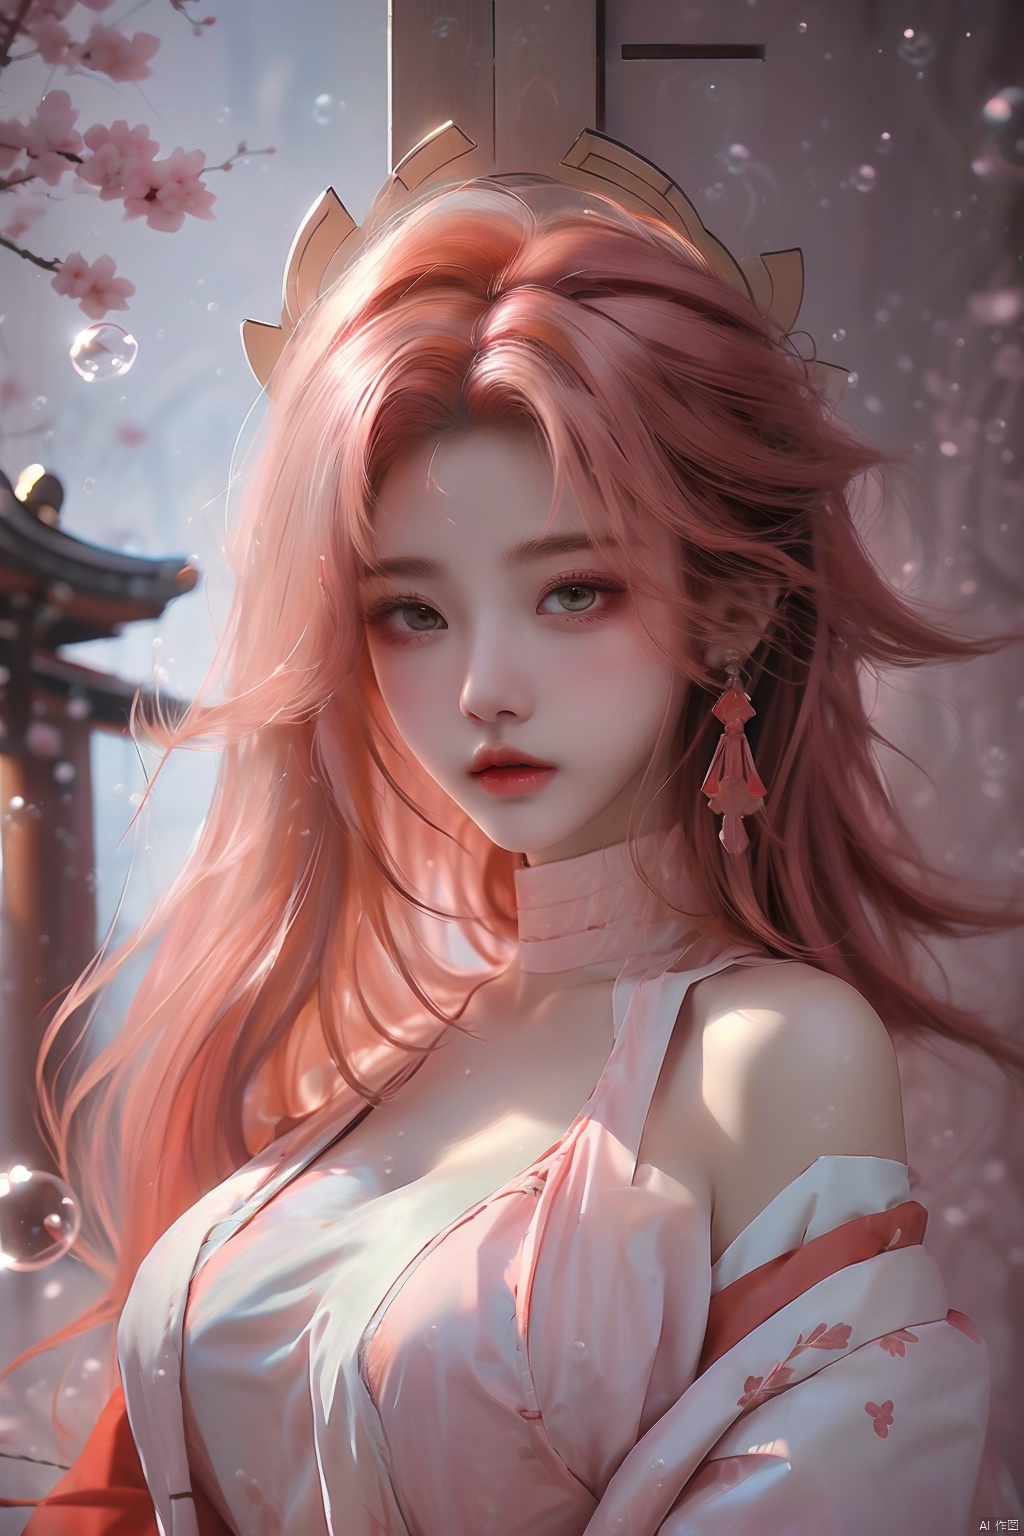  (bubble:1.5),(Masterpiece, Excellent, 1girl, solo, complex details, color difference), realism, ((medium breath)), off-the-shoulders, (bubble:1.5),big breasts, sexy, Yae Miko, long pink hair, red headdress, red highlight, hair above one eye, green eyes, earrings, sharp eyes, perfectly symmetrical figure, choker, neon shirt, open jacket, turtleneck sweater, against the wall, brick wall, graffiti, dim lighting, alley, looking at the audience, ((mean, seductive, charming)), ((cherry blossom background ))),((Japanese temple background)))), (((Glow-in-the-dark background))), yae miko, (\meng ze\)